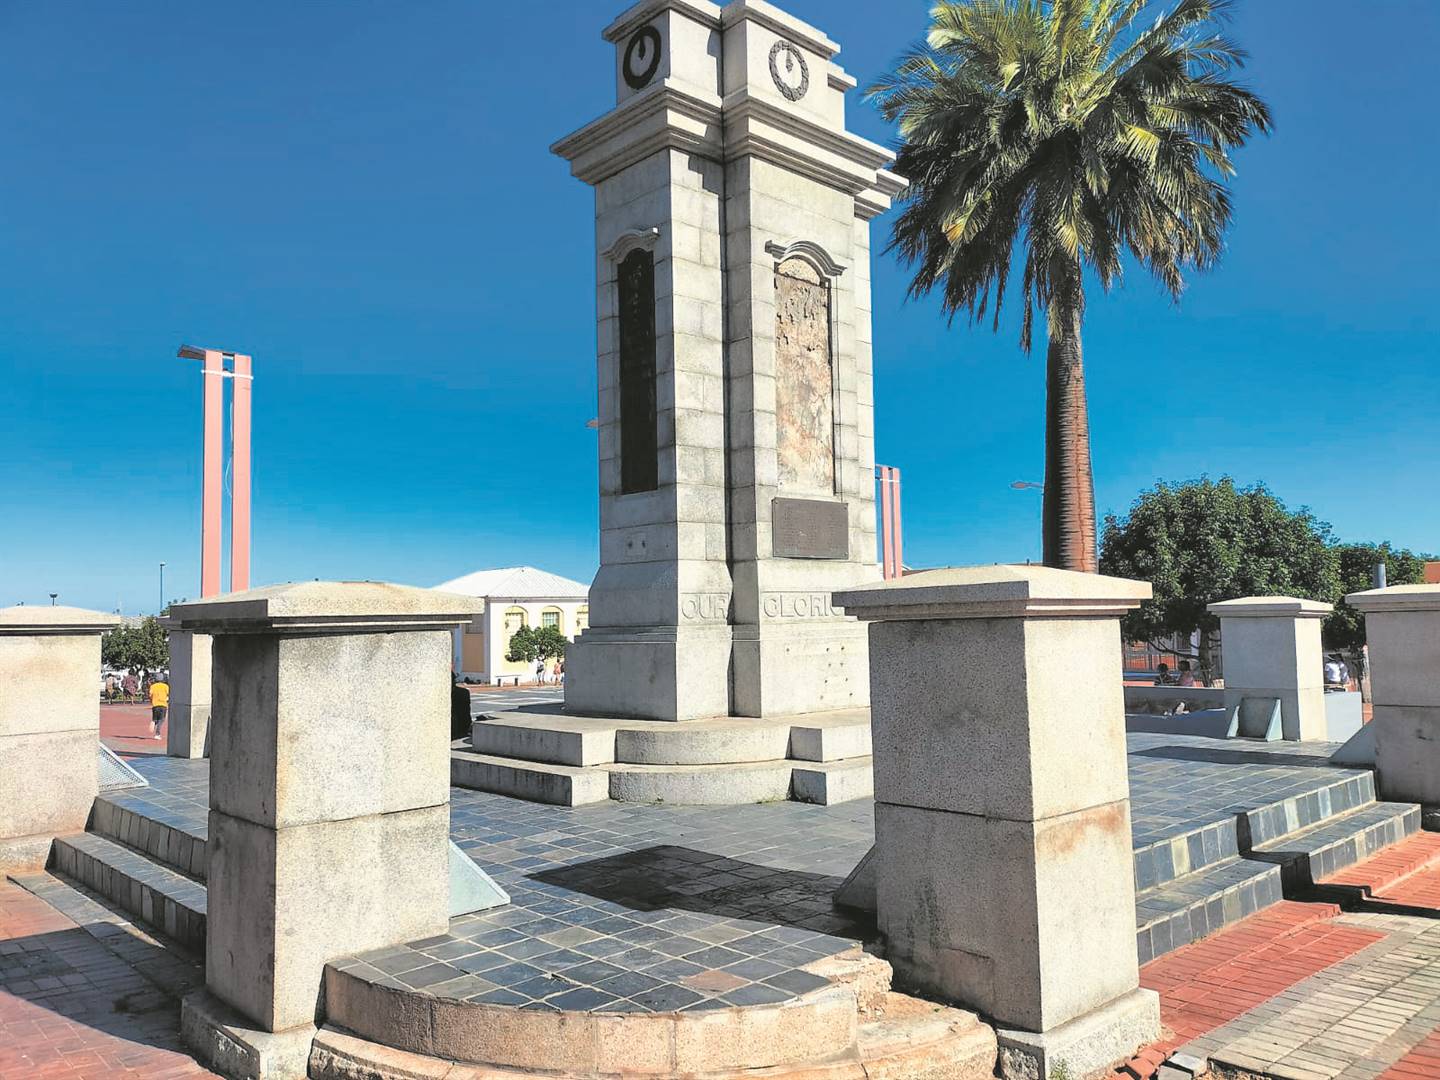 Volunteers cleaned the market square and the Anglo-Boer War Monument on this square and painted a wall next to the monument.